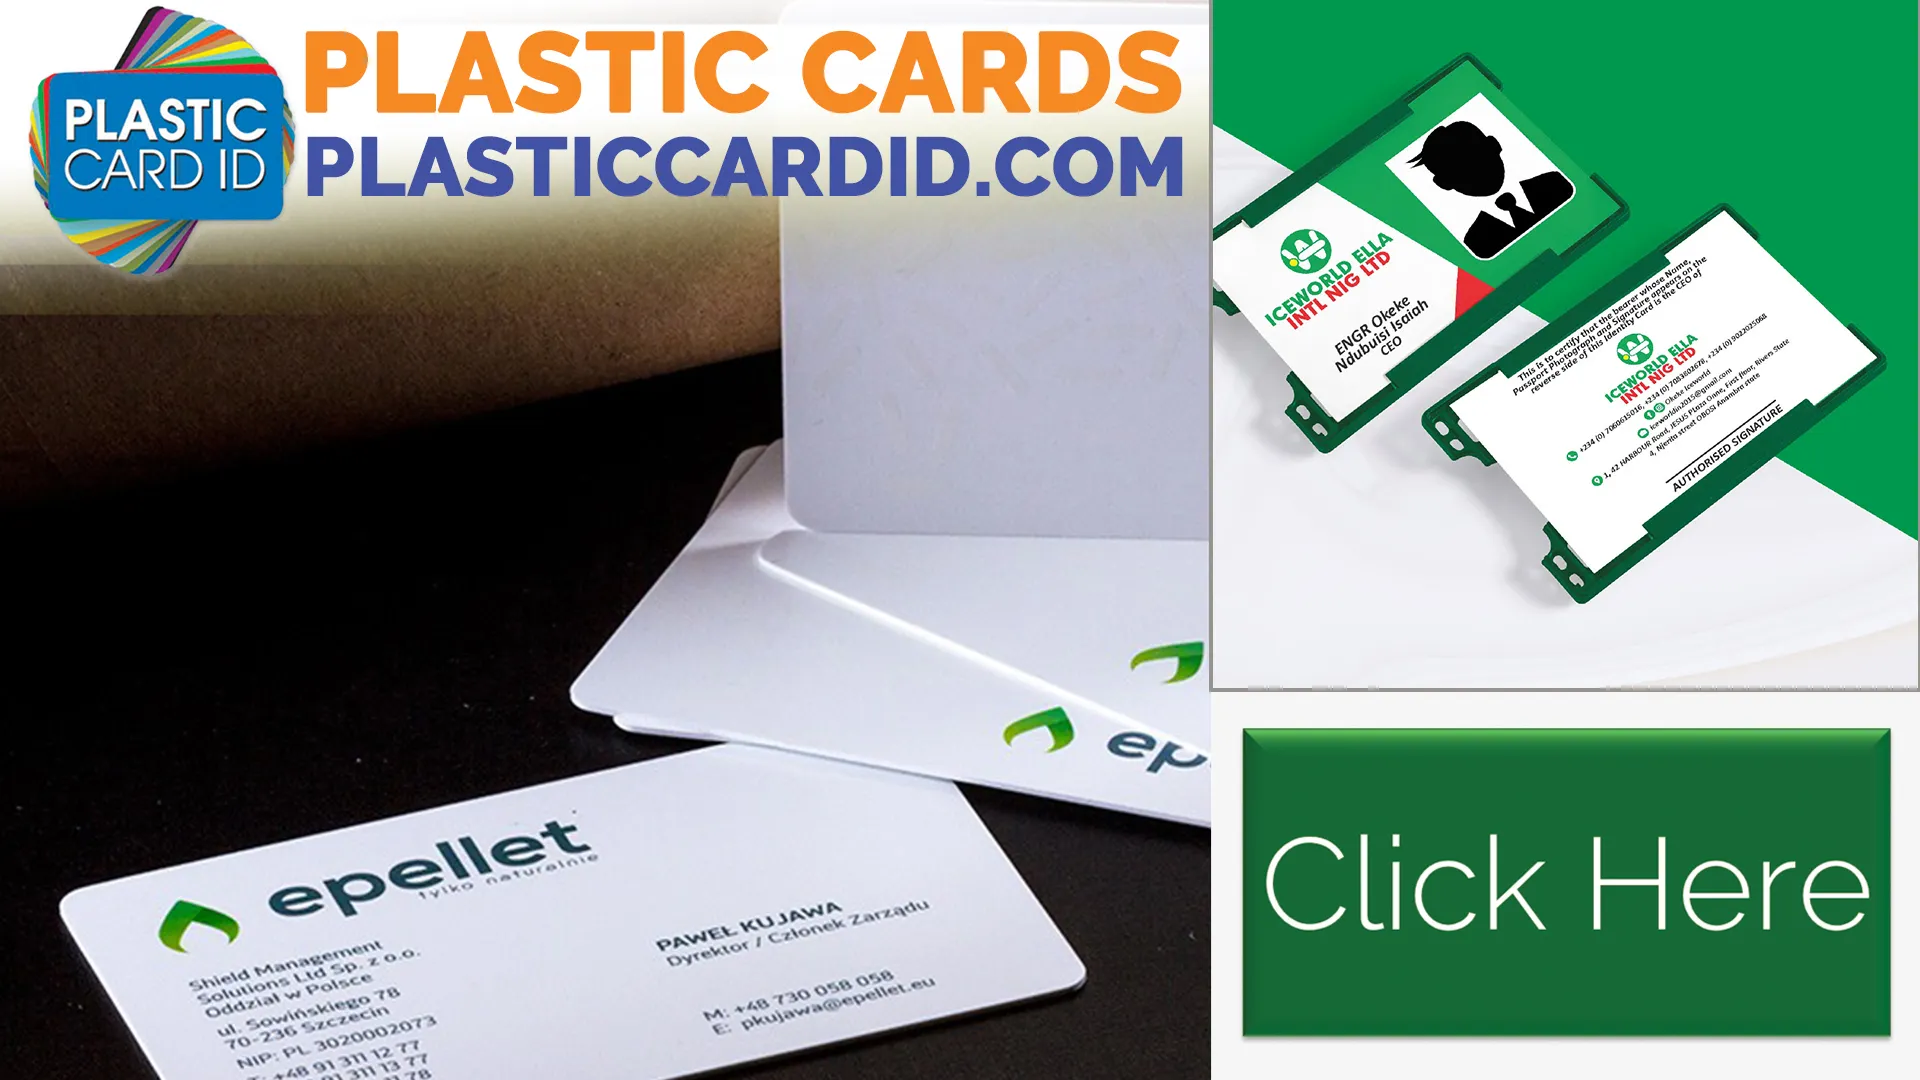 Why Choose a Card from Plastic Card ID




?